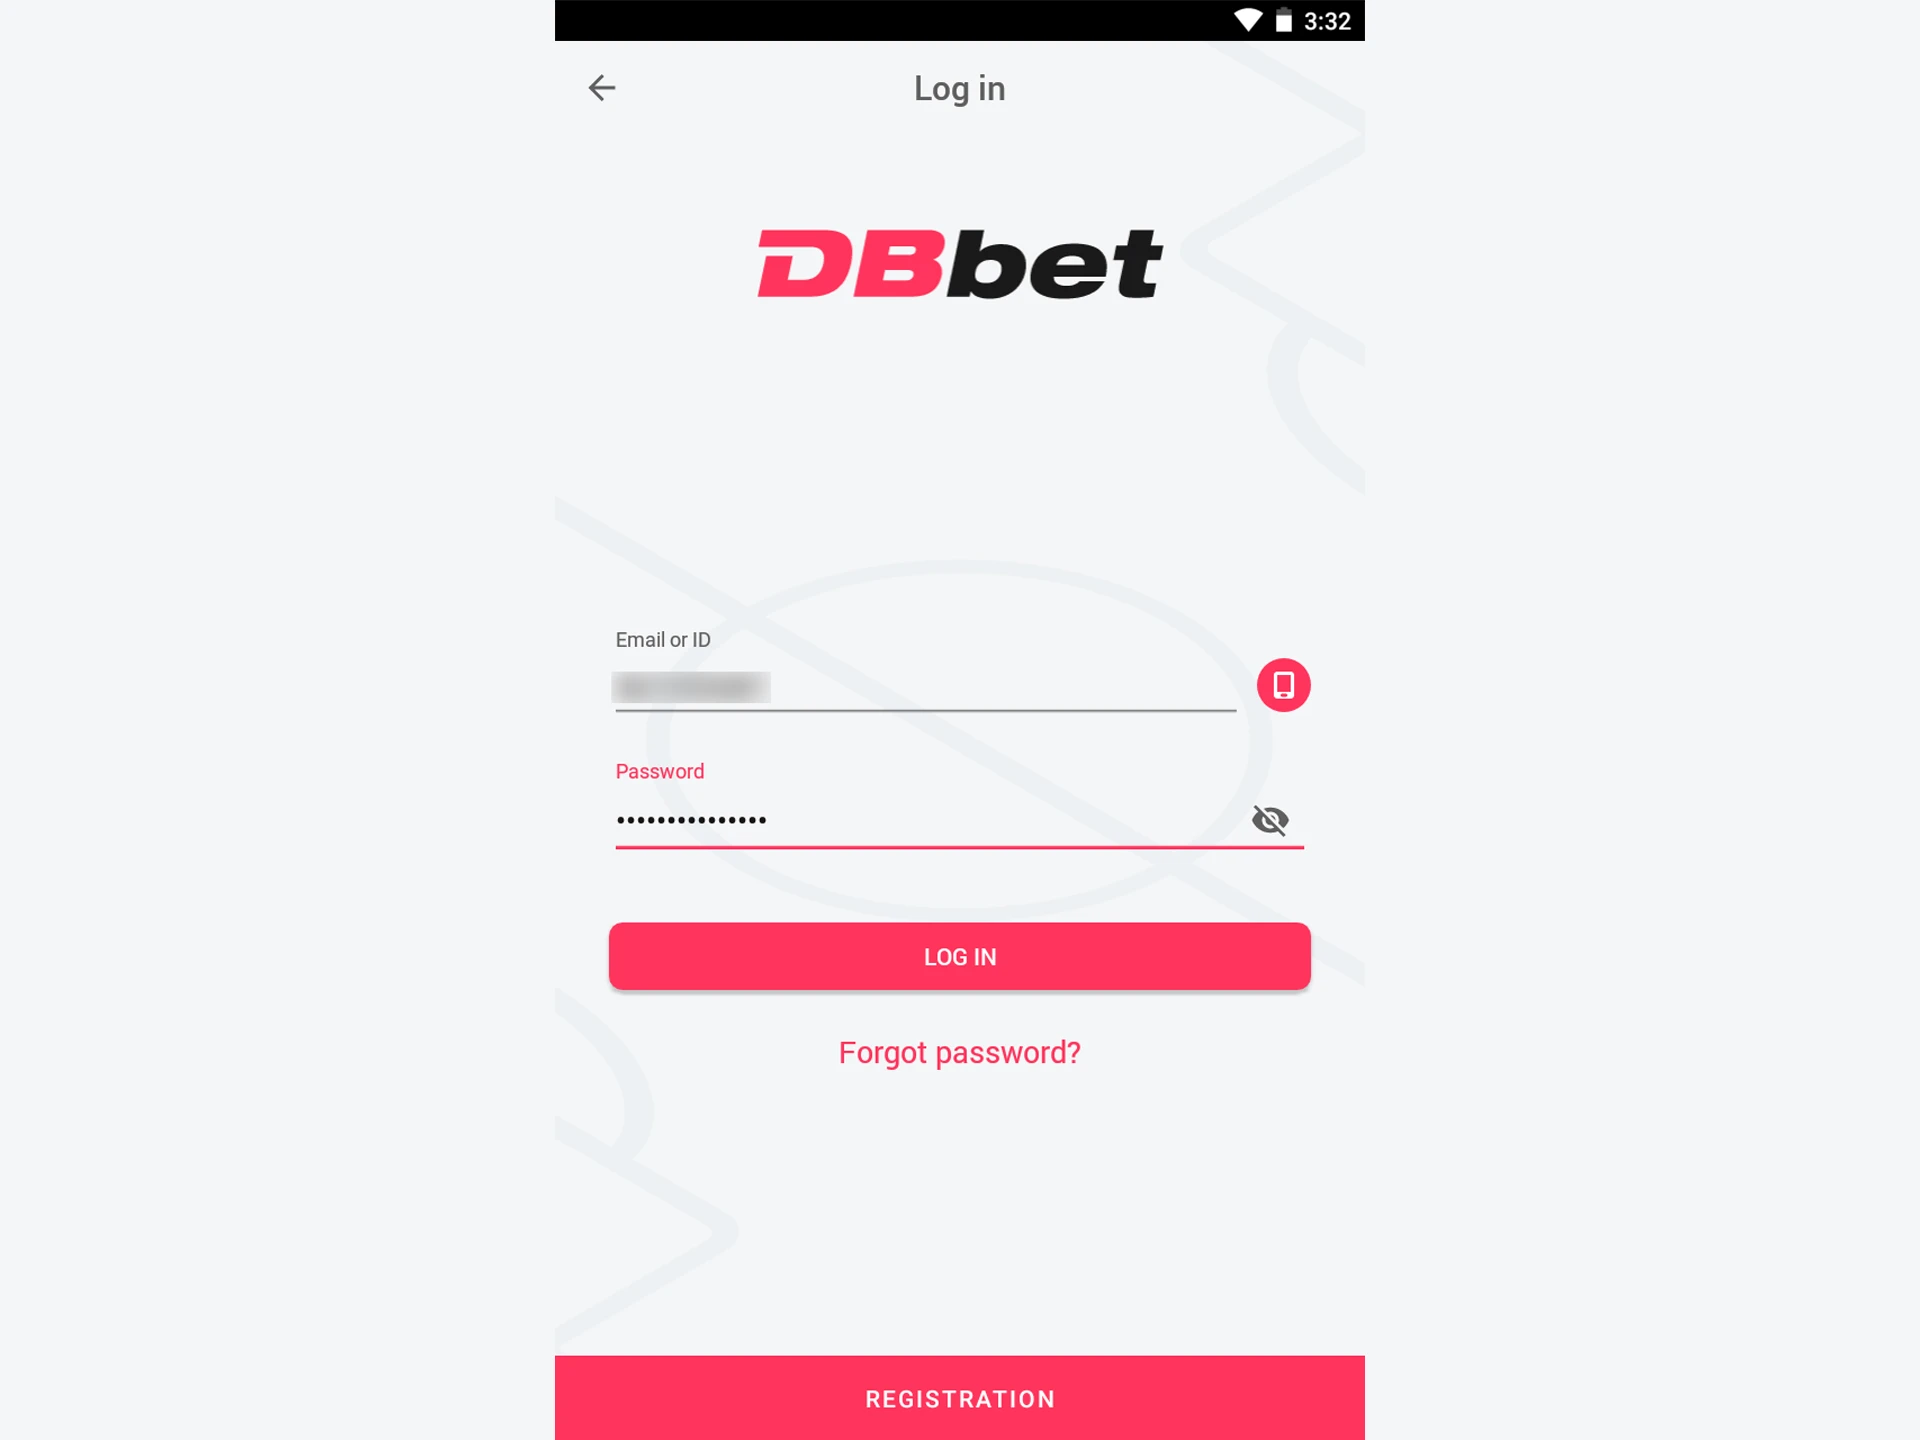 Enter your details to log in to your DBbet account.